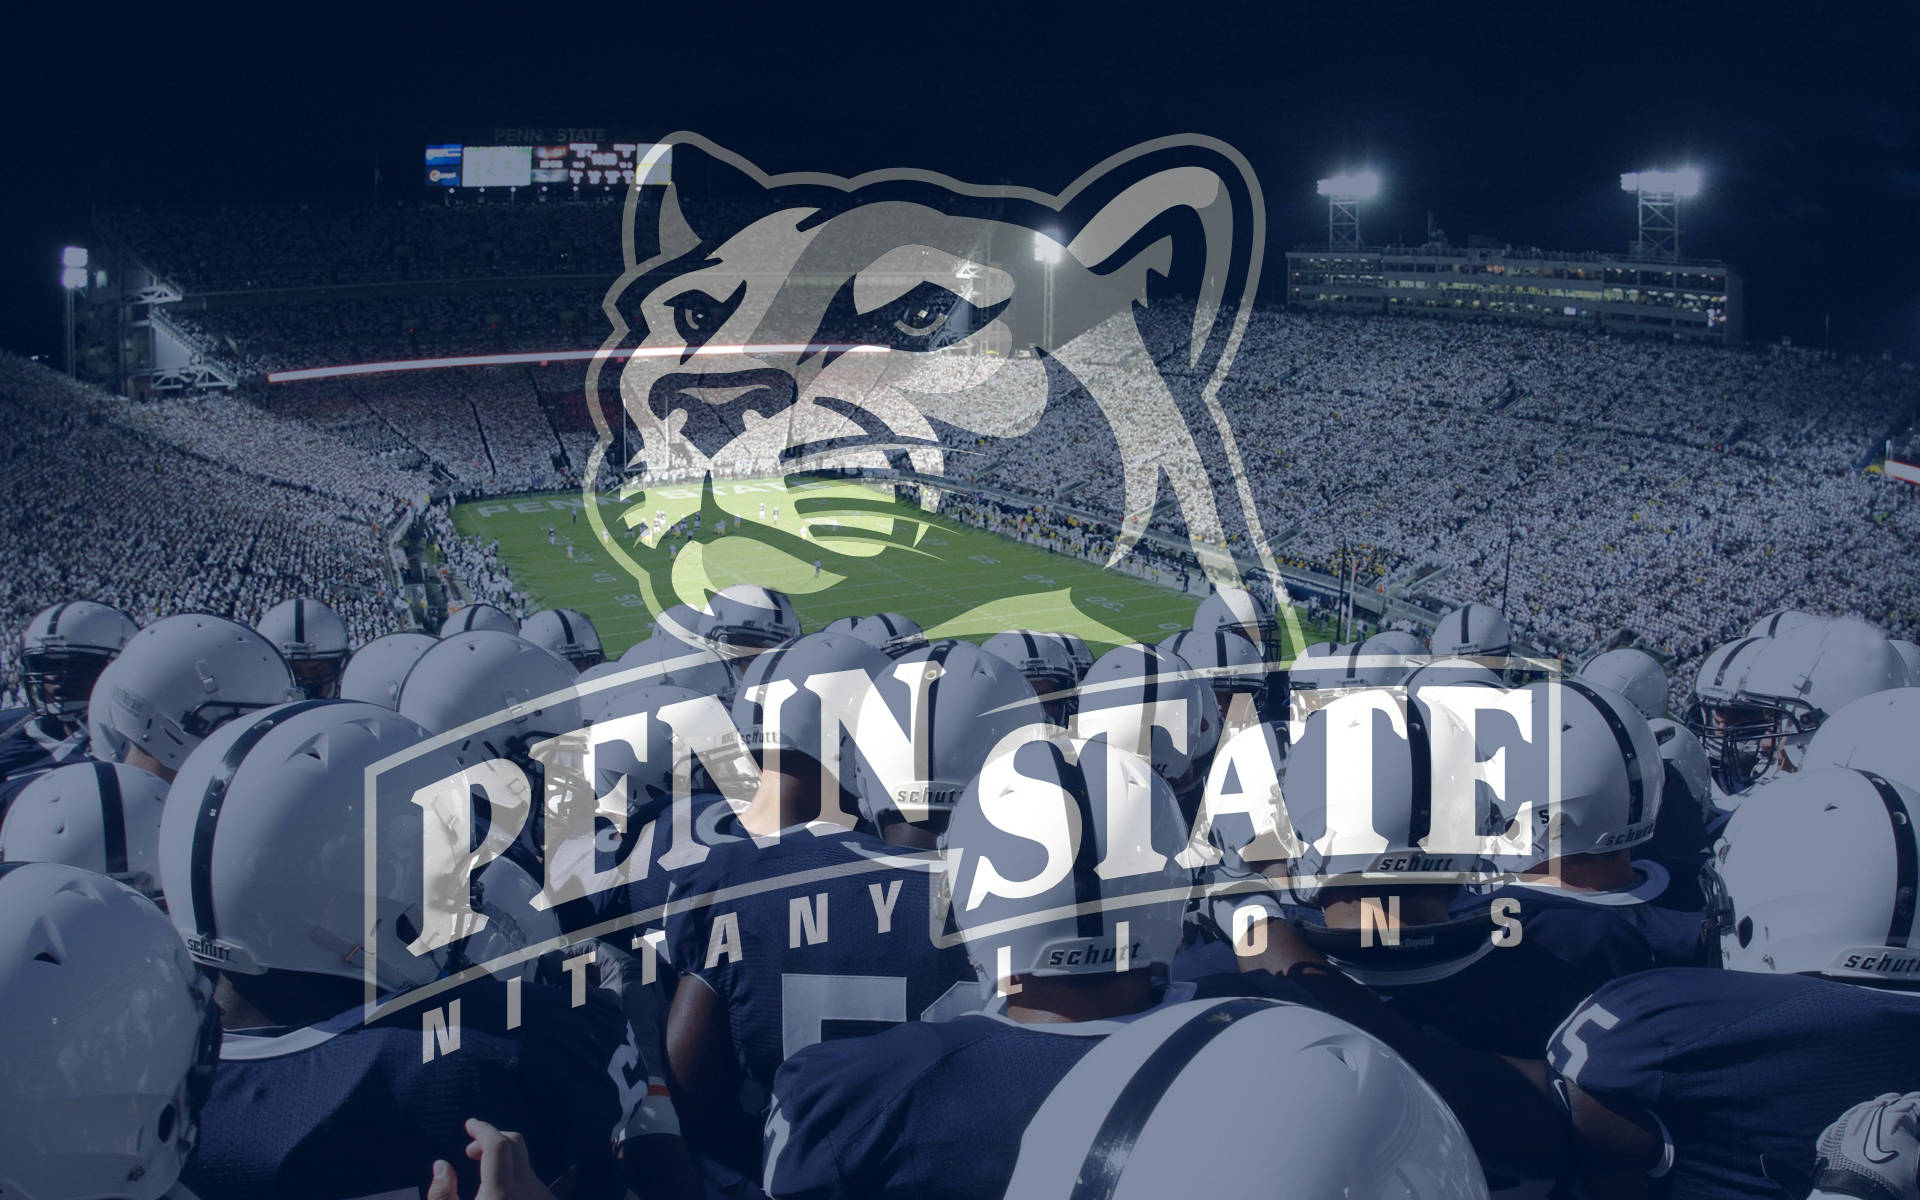 Feel the Power of the Nittany Lions! Wallpaper